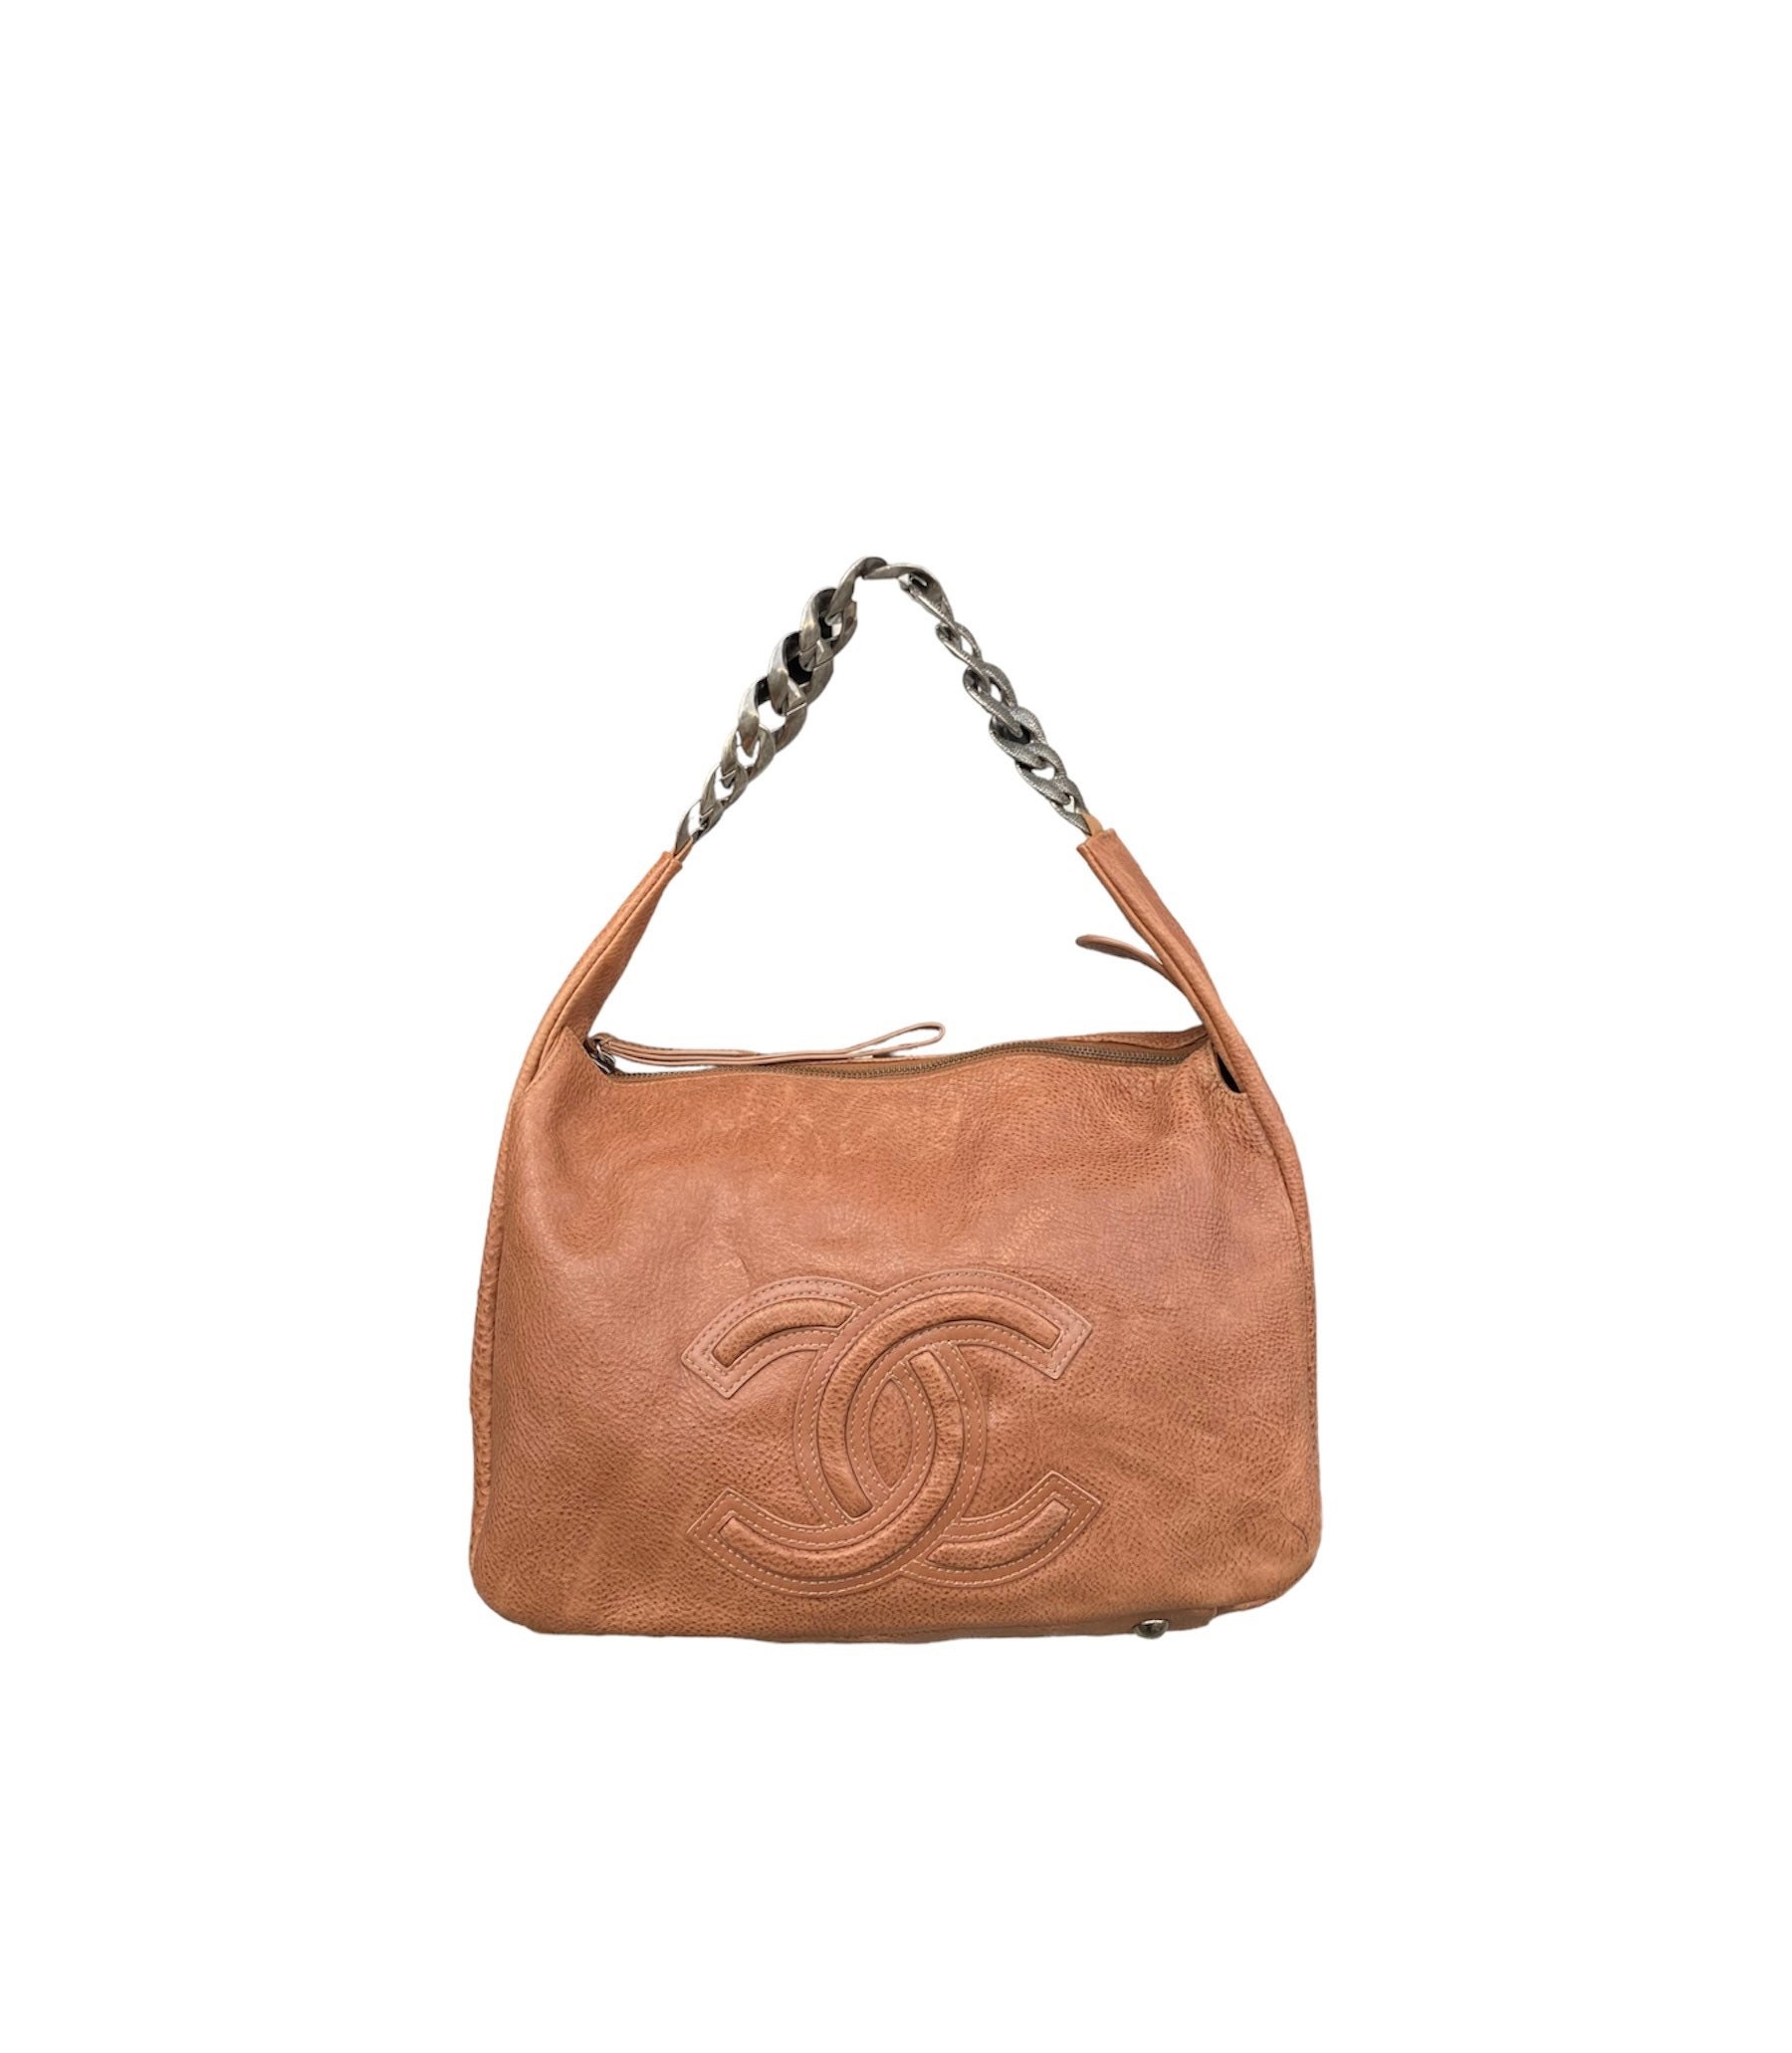 Chanel Shoulder Bag Hobo Leather Brown Silver Chain -  Norway